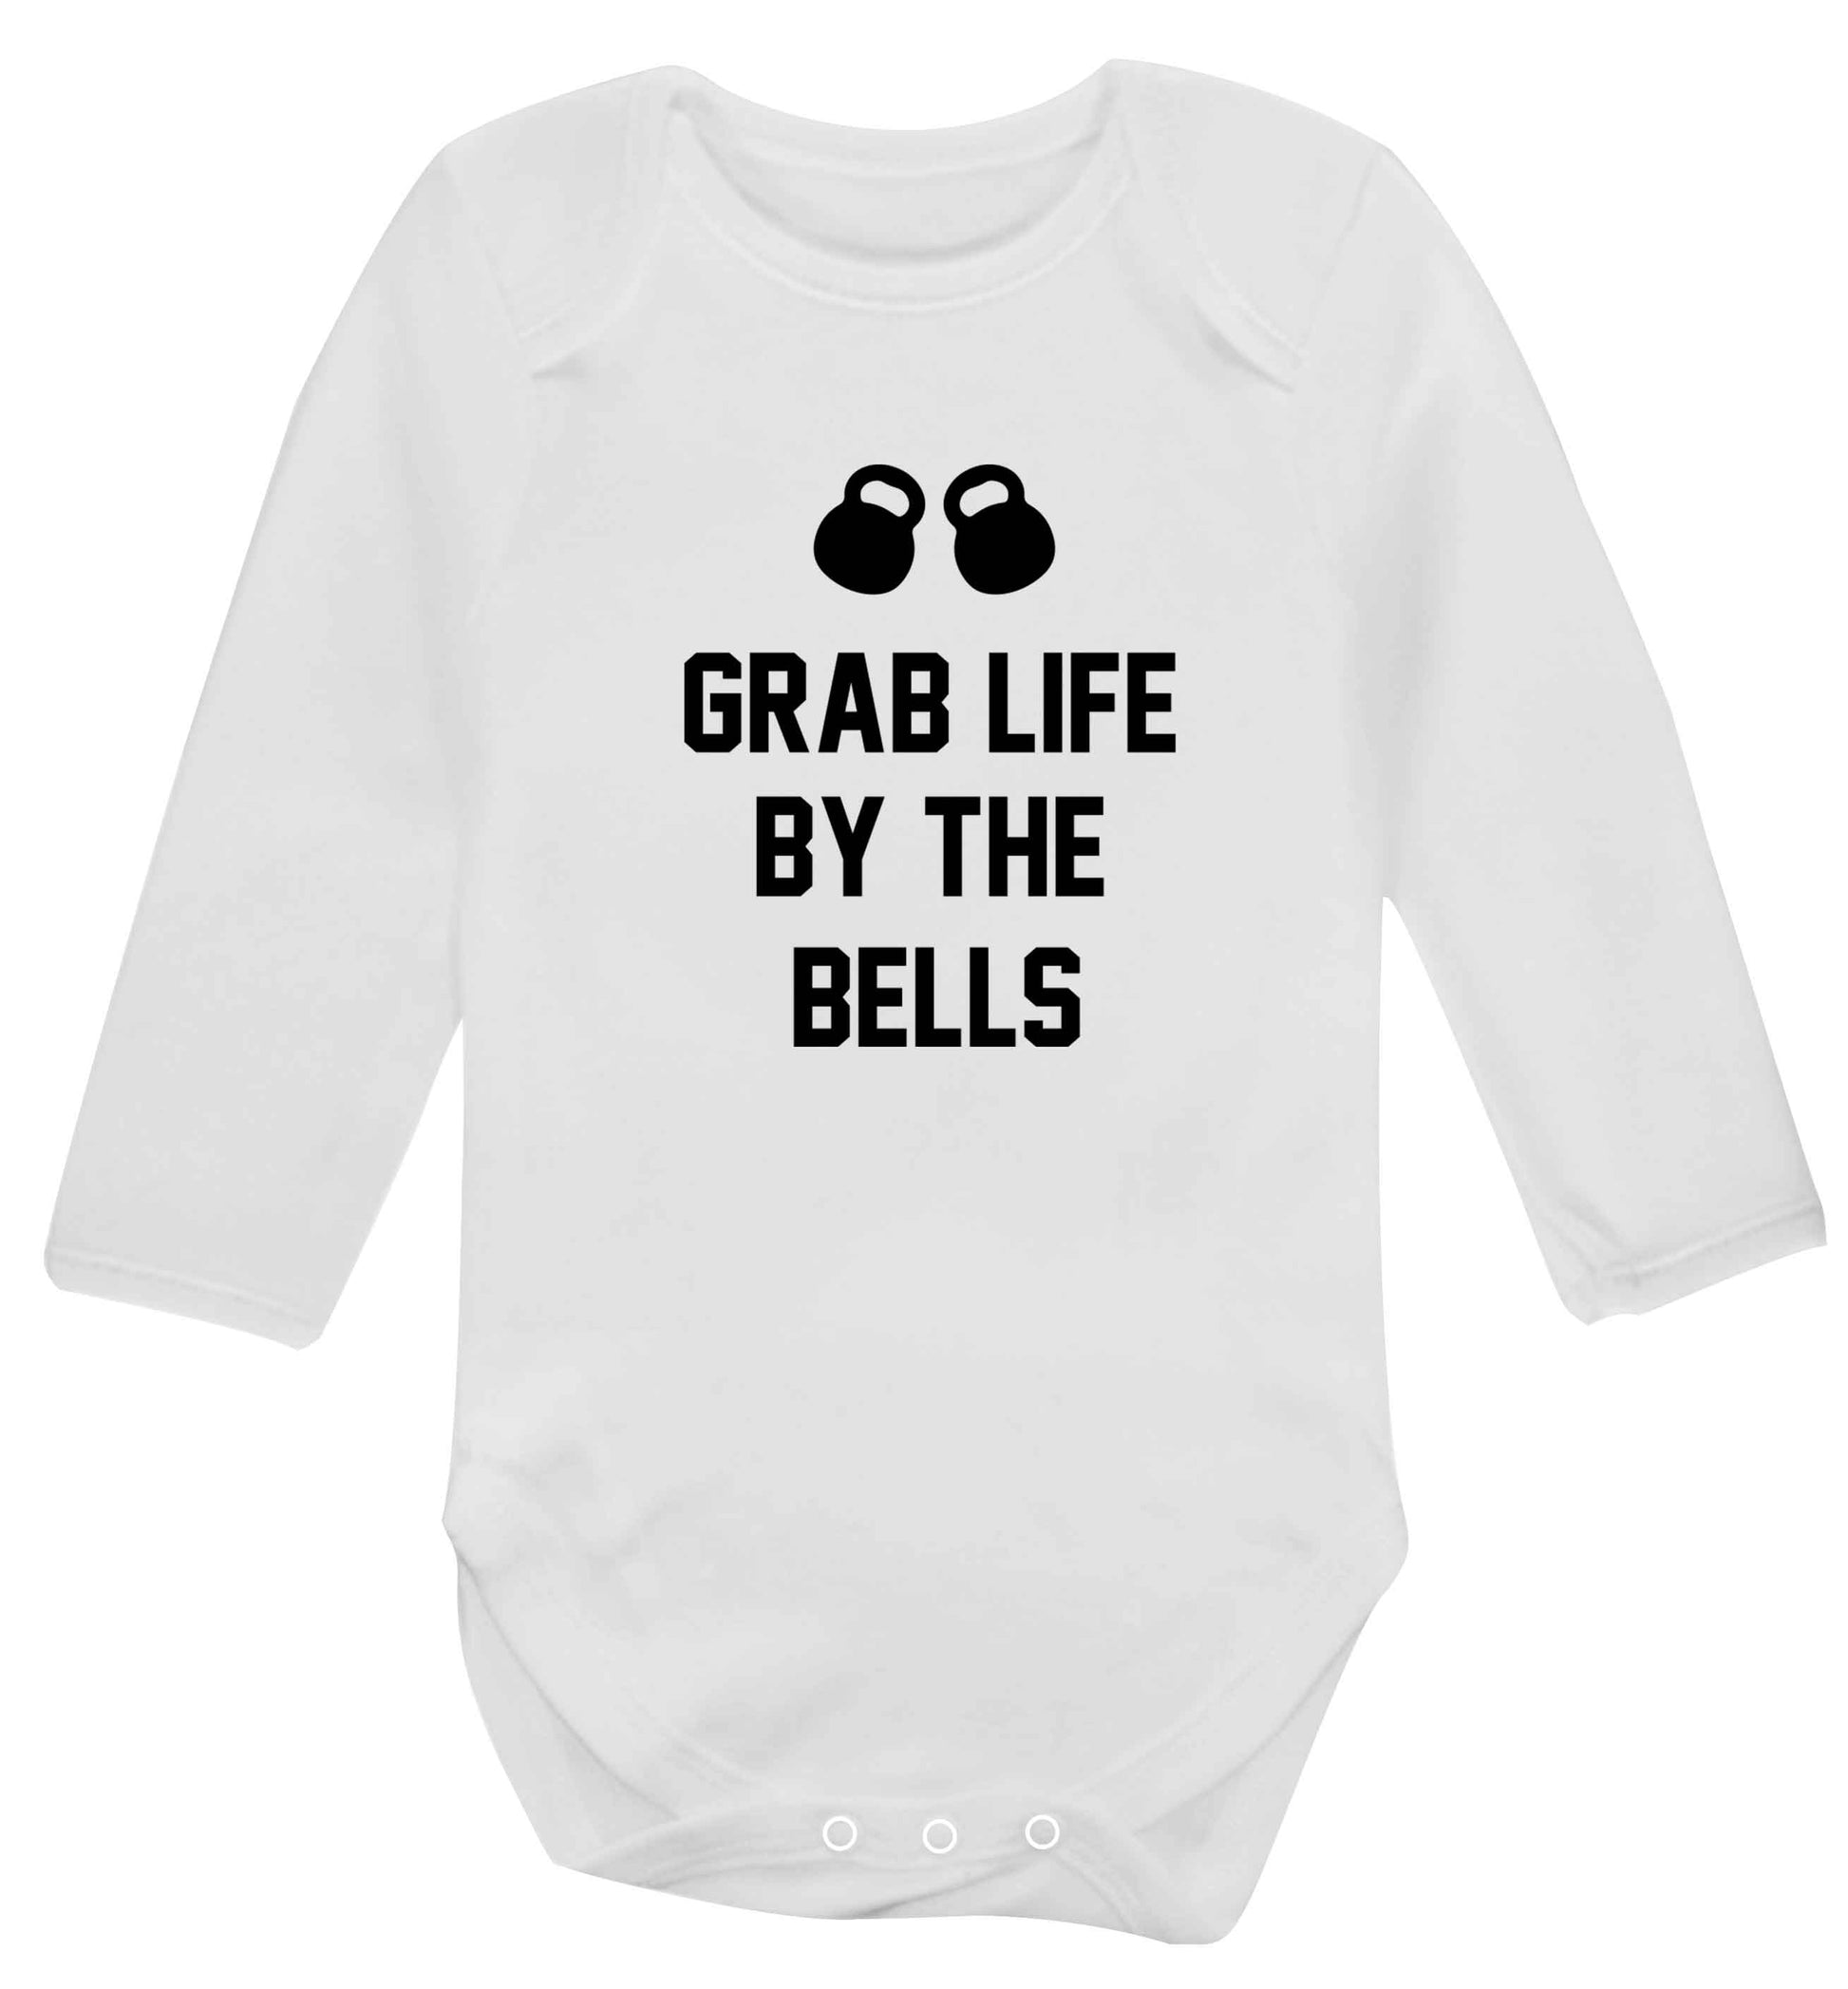 Grab life by the bells baby vest long sleeved white 6-12 months